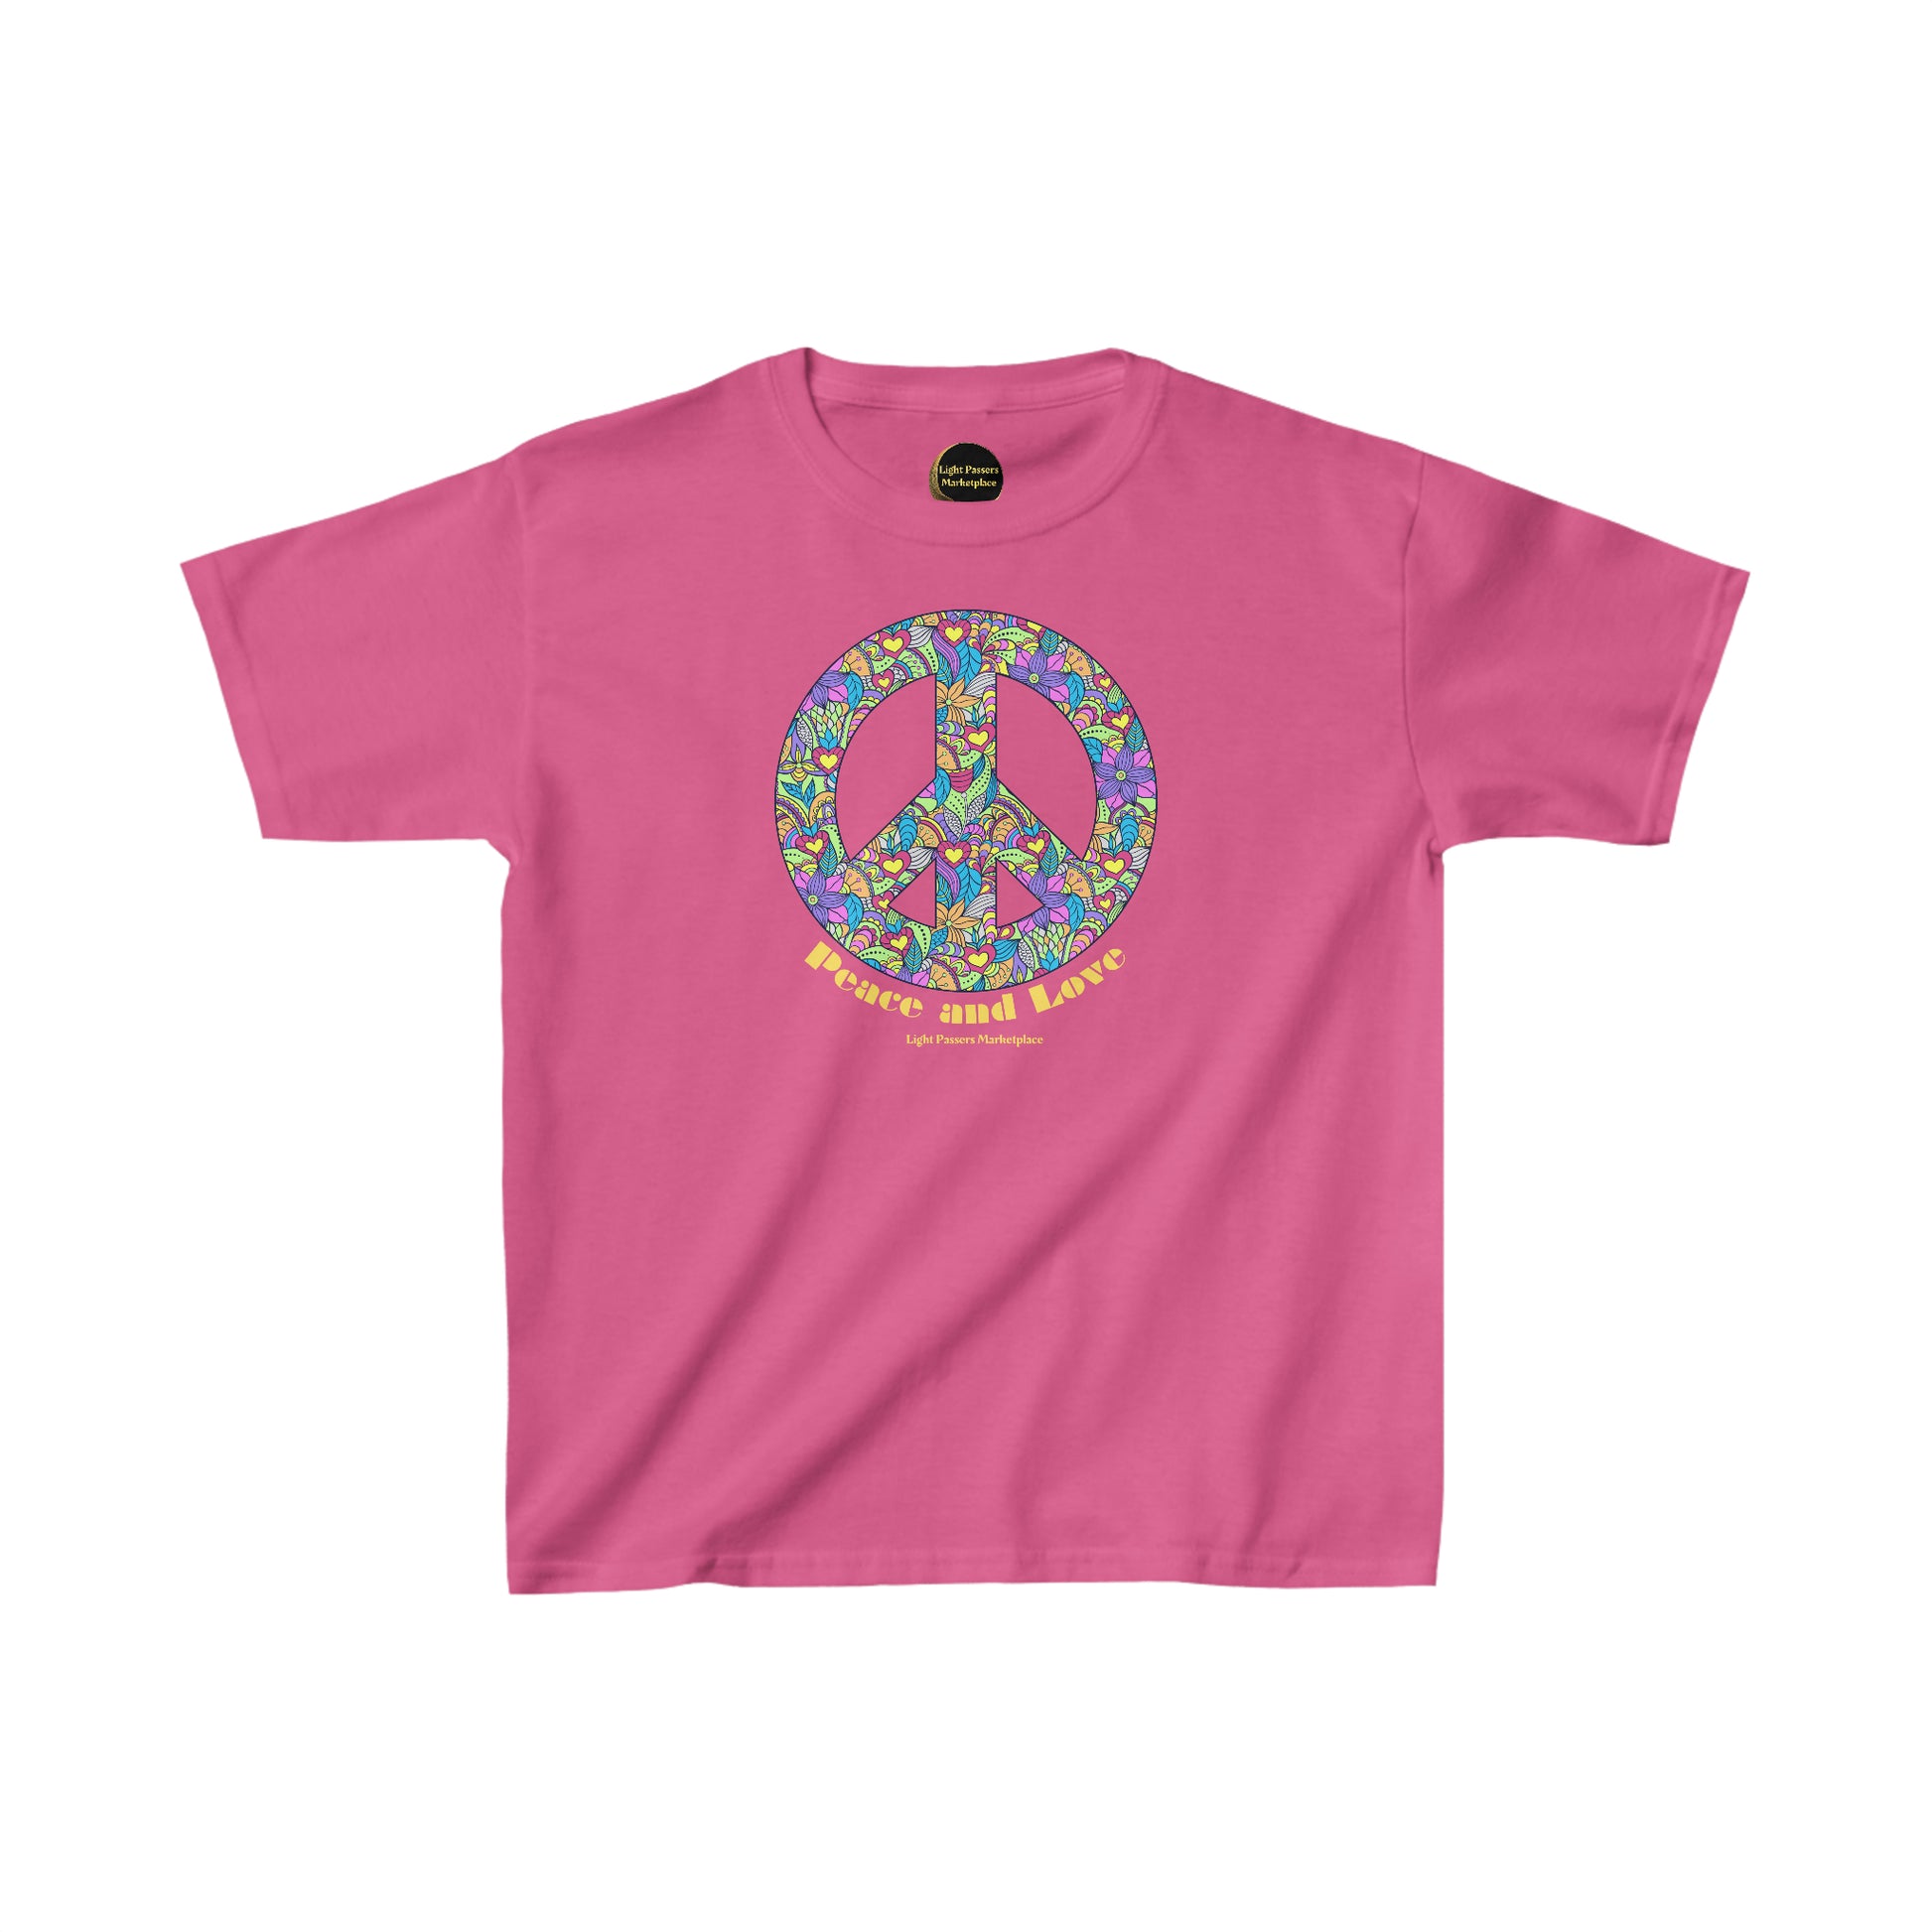 Youth heavy cotton t-shirt featuring a pink shirt with a peace sign, flowers, and hearts design. Made of 100% cotton, ideal for printing, with twill tape shoulders for durability and curl-resistant collar.